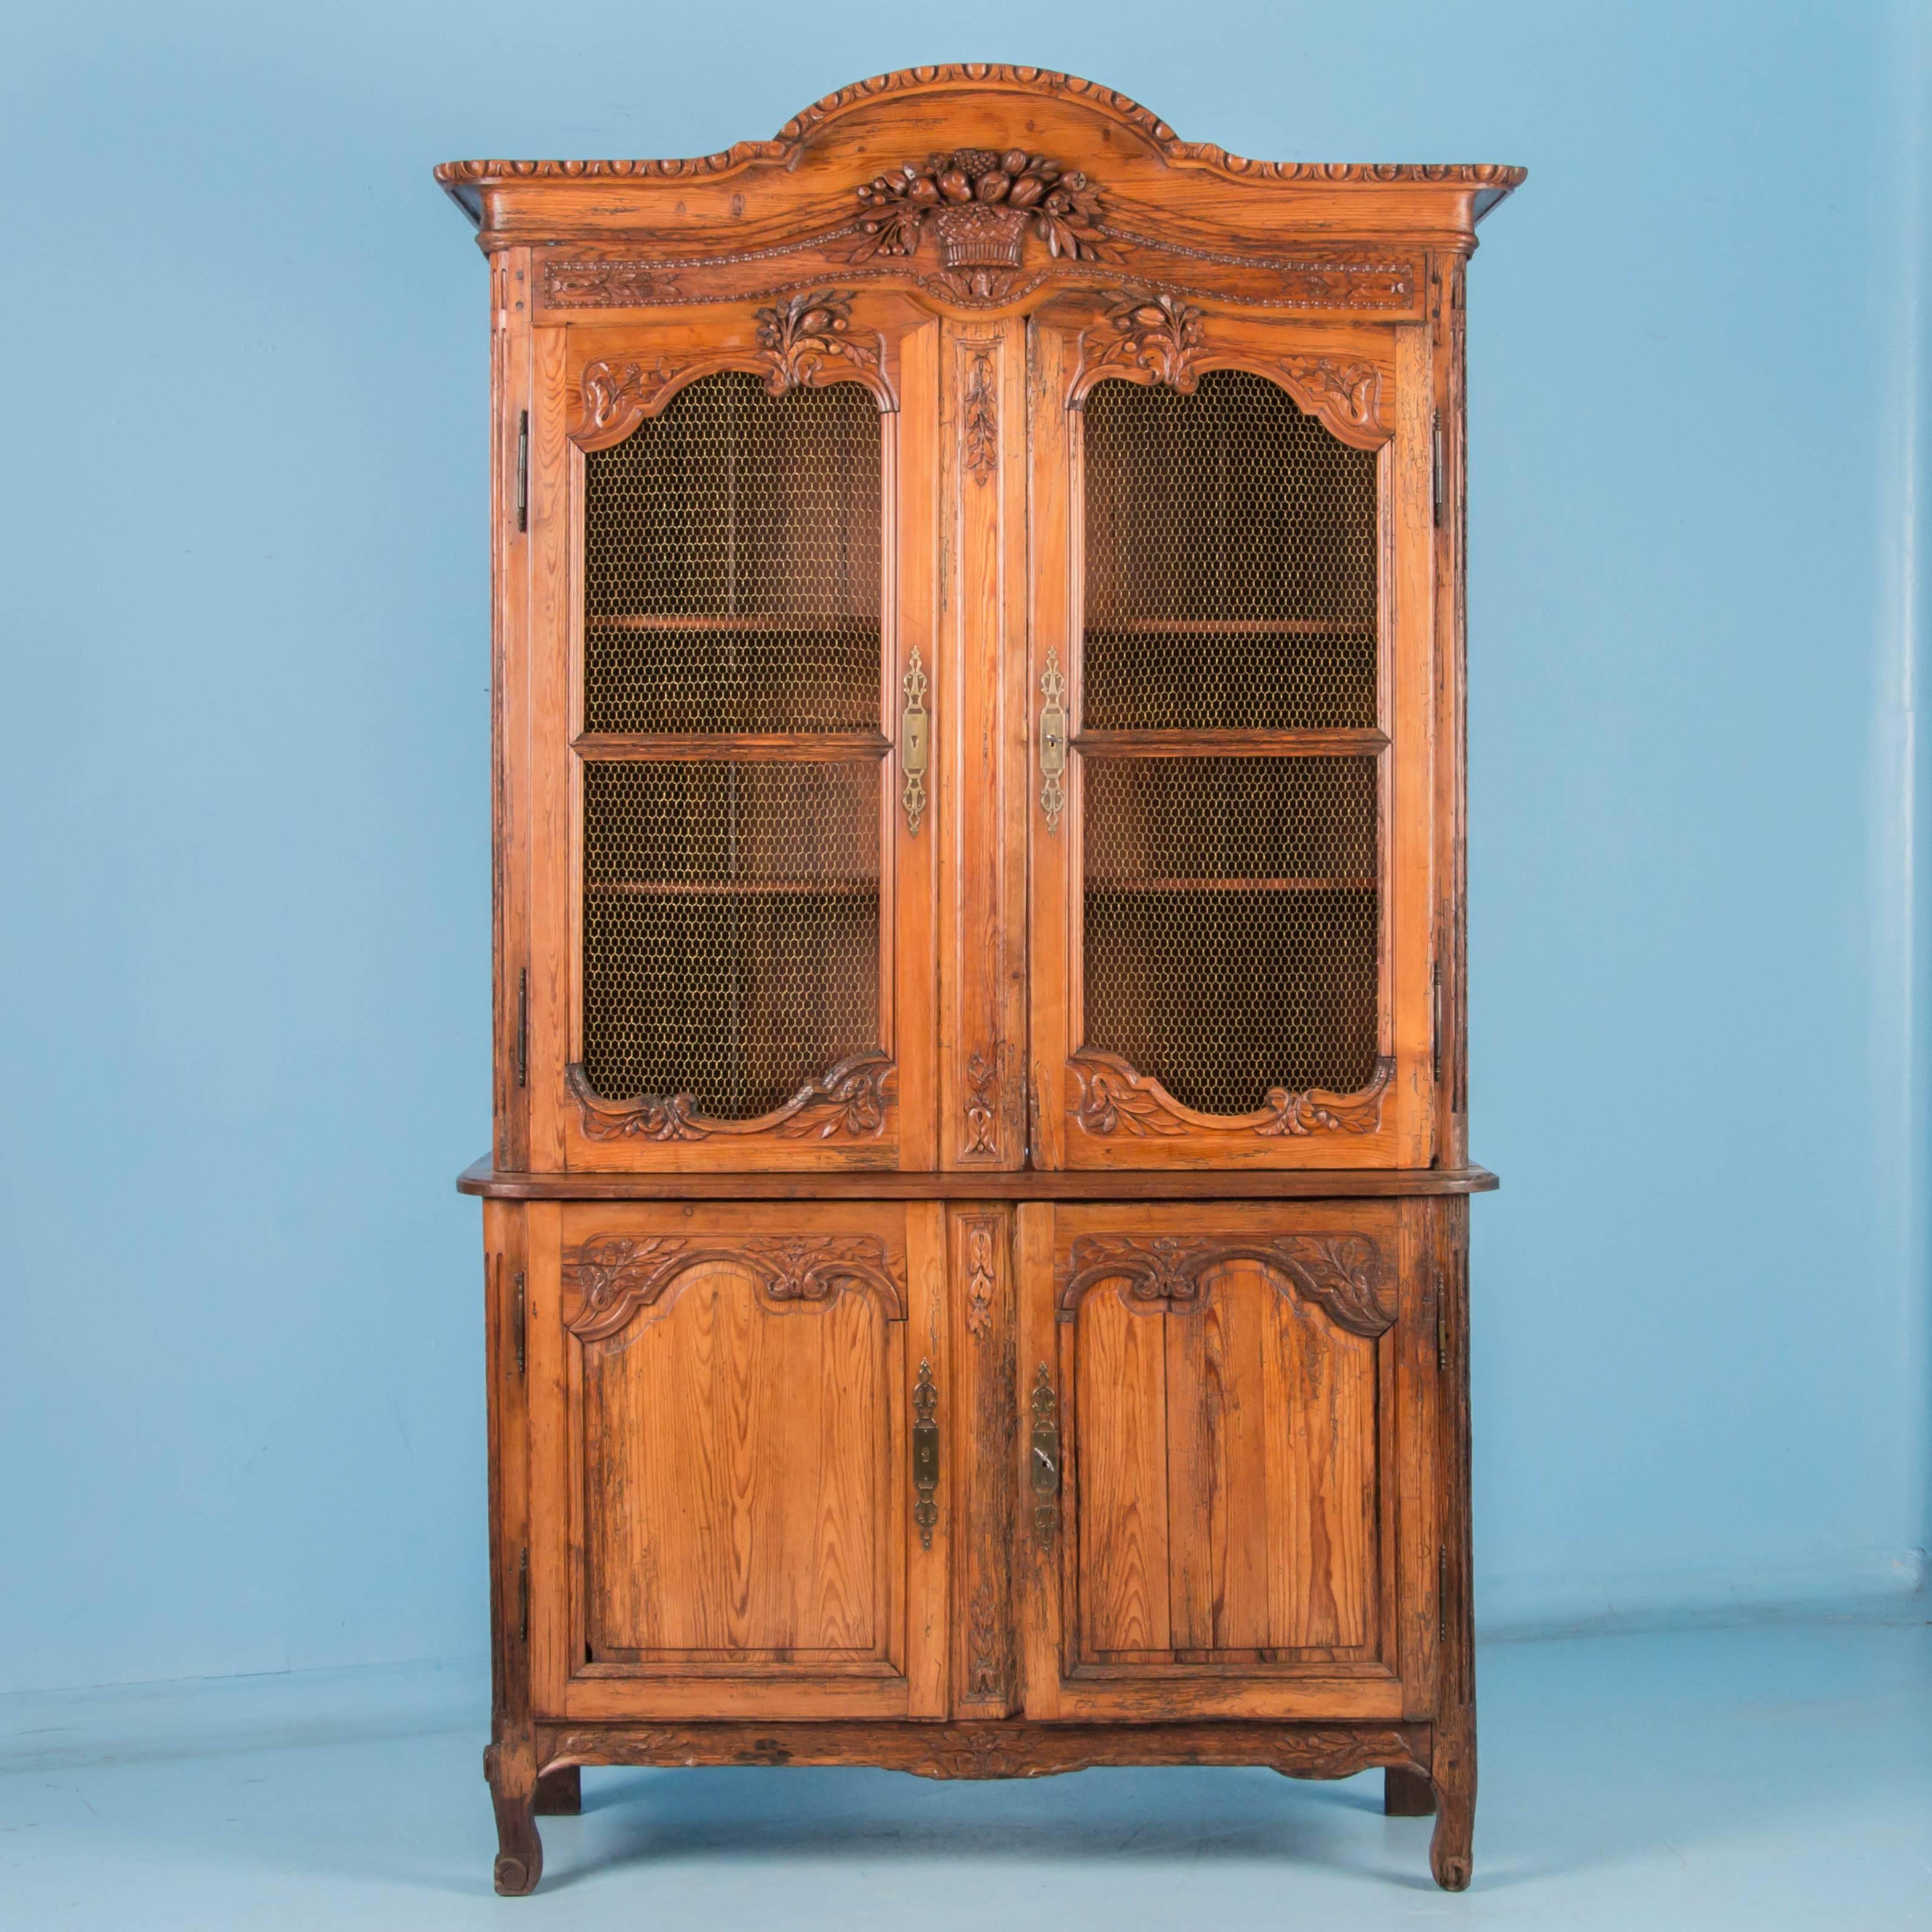 Antique hand-carved four door pine bookcase cabinet from France, circa 1820-1840, made in two sections with the upper doors covered in a honeycomb of brass wire. Elements of the carved woven basket with fruit and flowers in the crown, are repeated